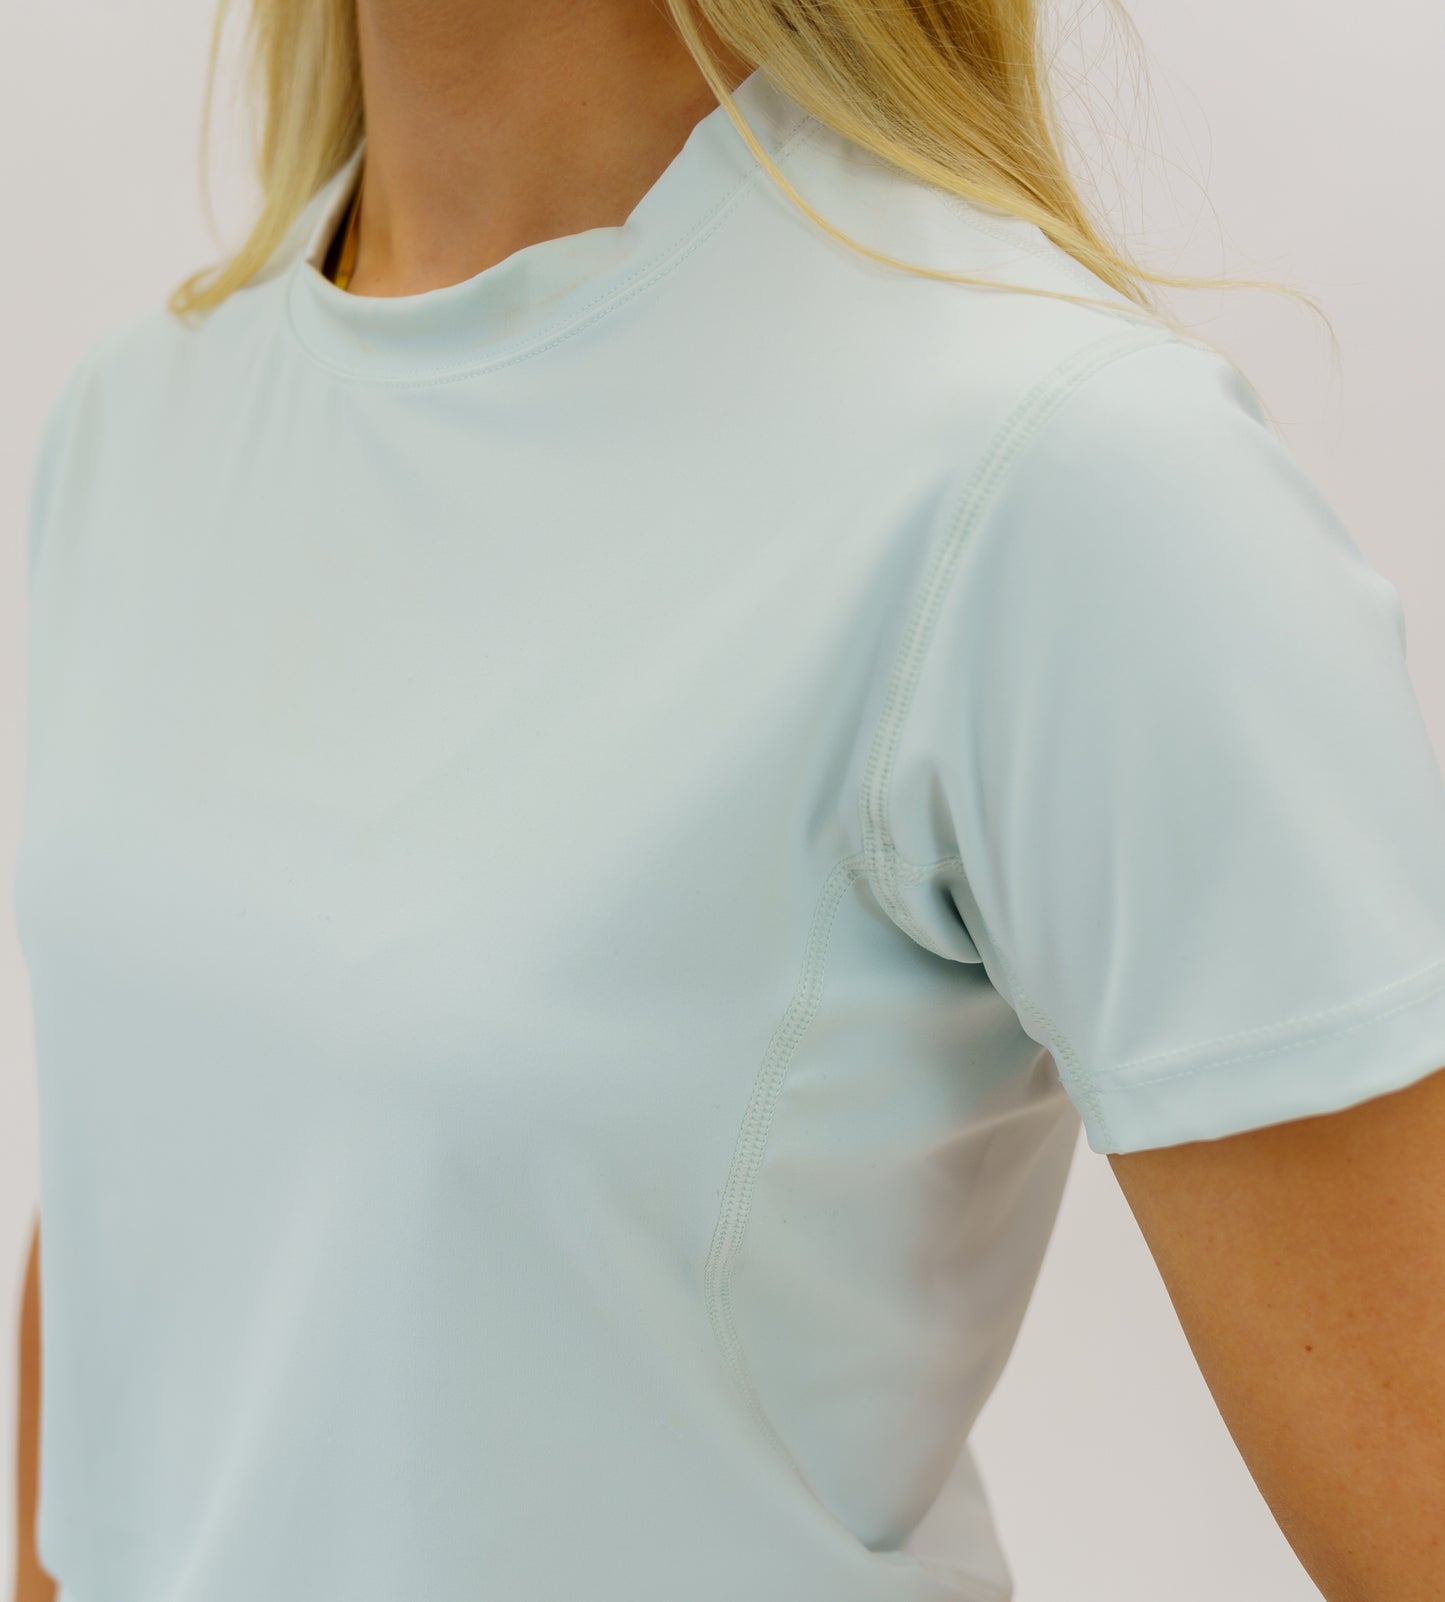 The Trainer S/S Active Top (Mint)